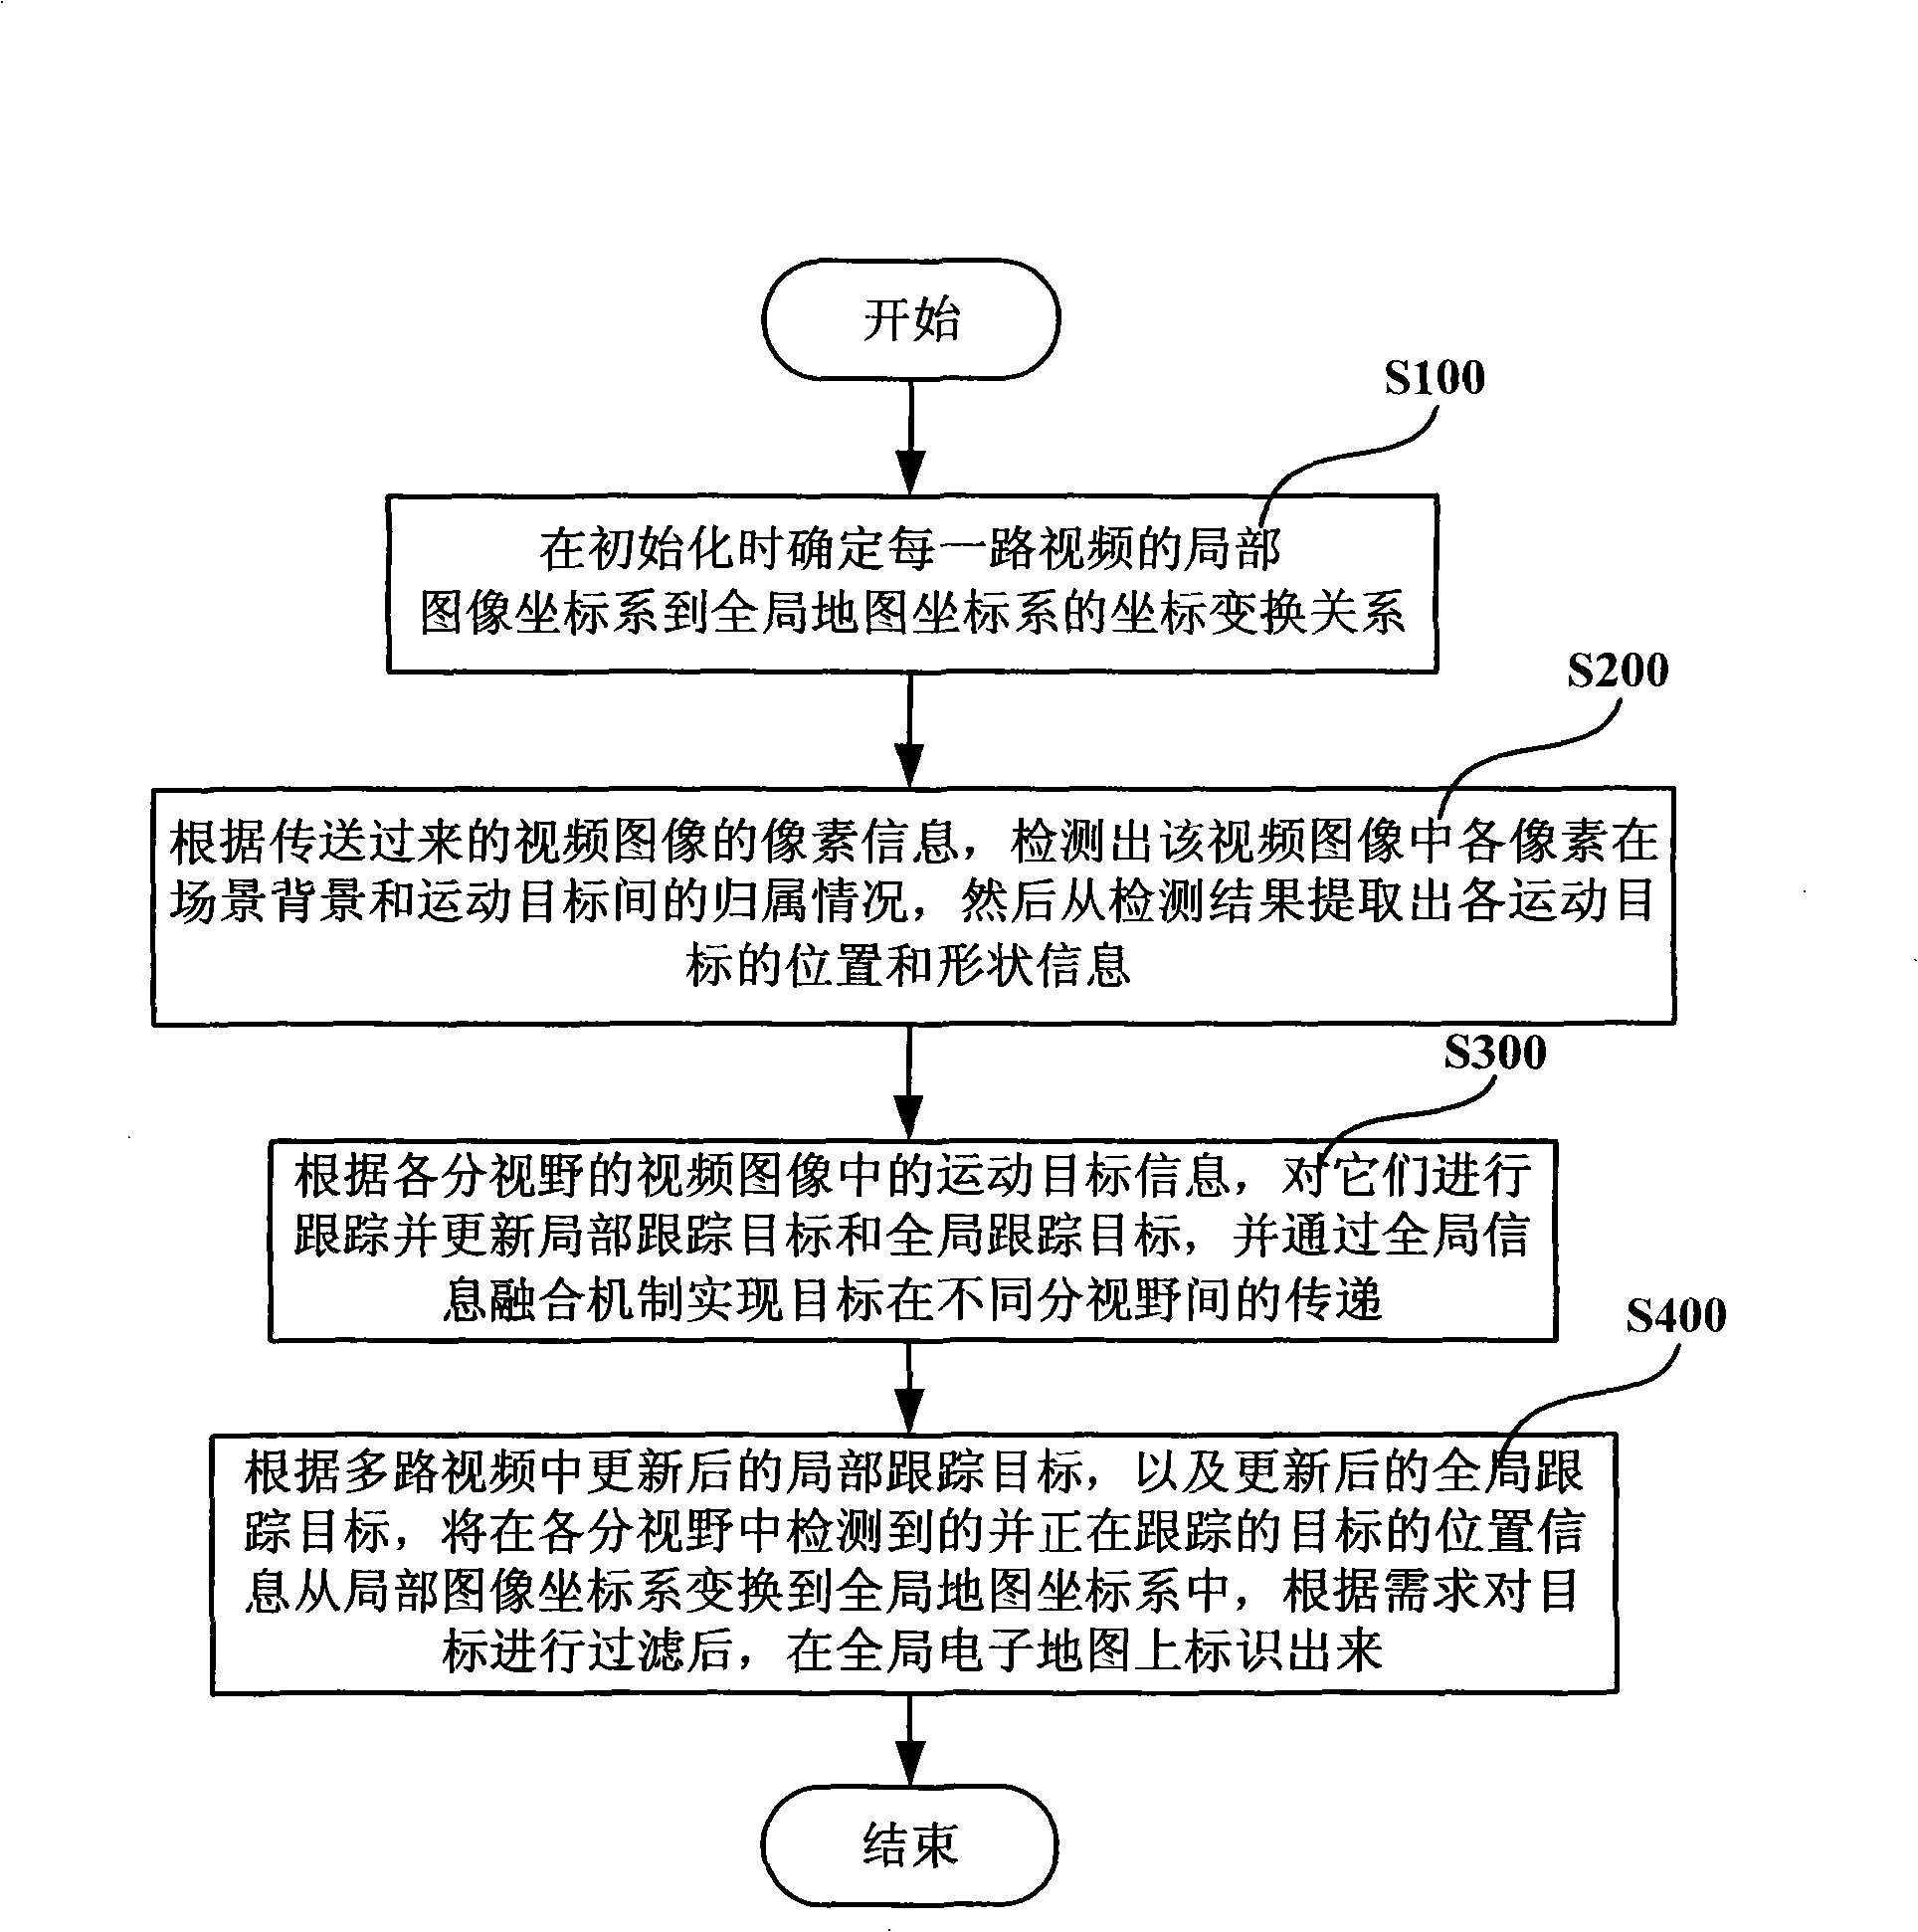 Method and system for amalgamation process and display of multipath video information when monitoring